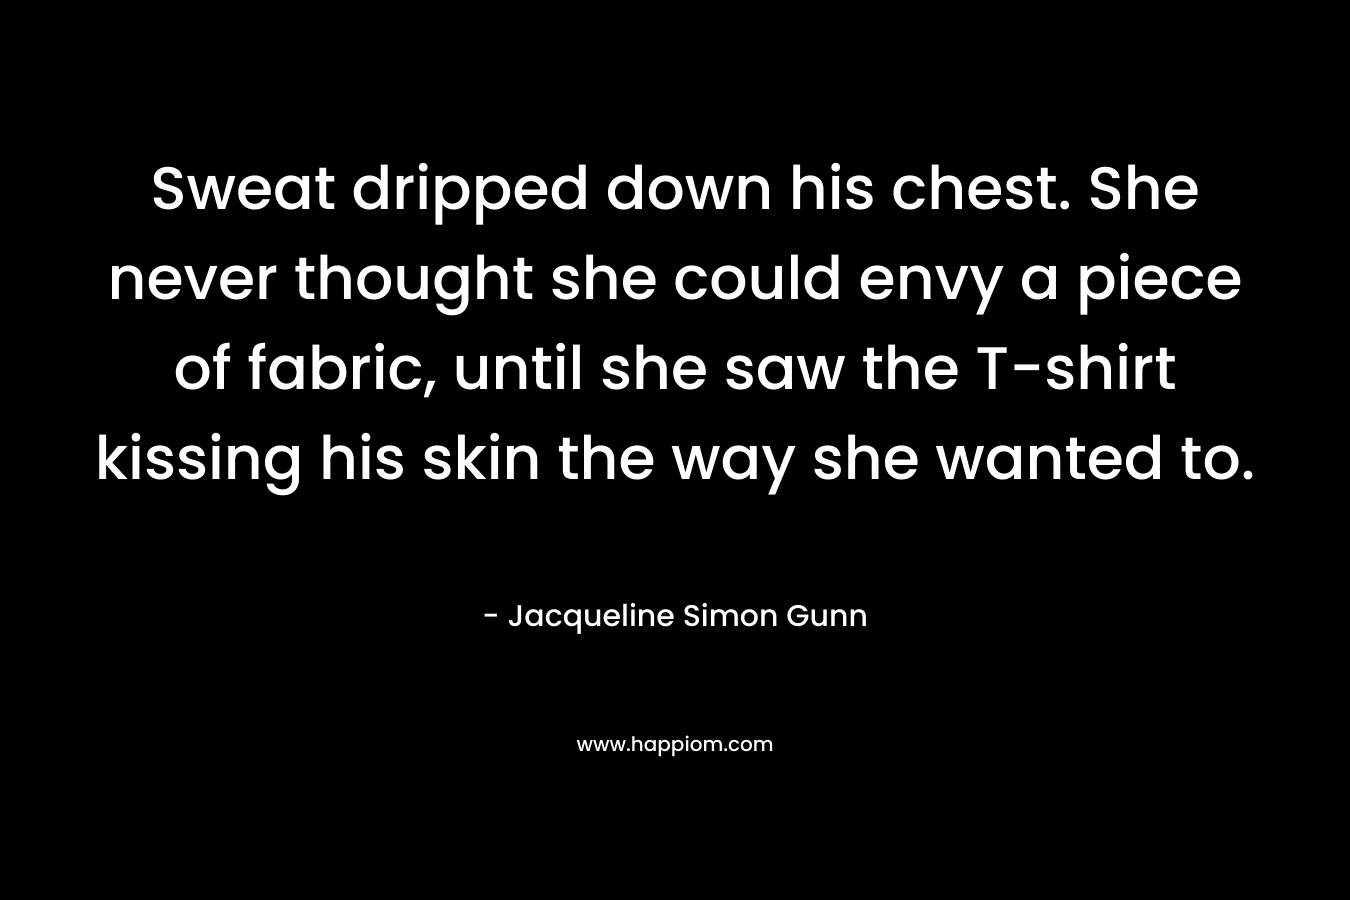 Sweat dripped down his chest. She never thought she could envy a piece of fabric, until she saw the T-shirt kissing his skin the way she wanted to.